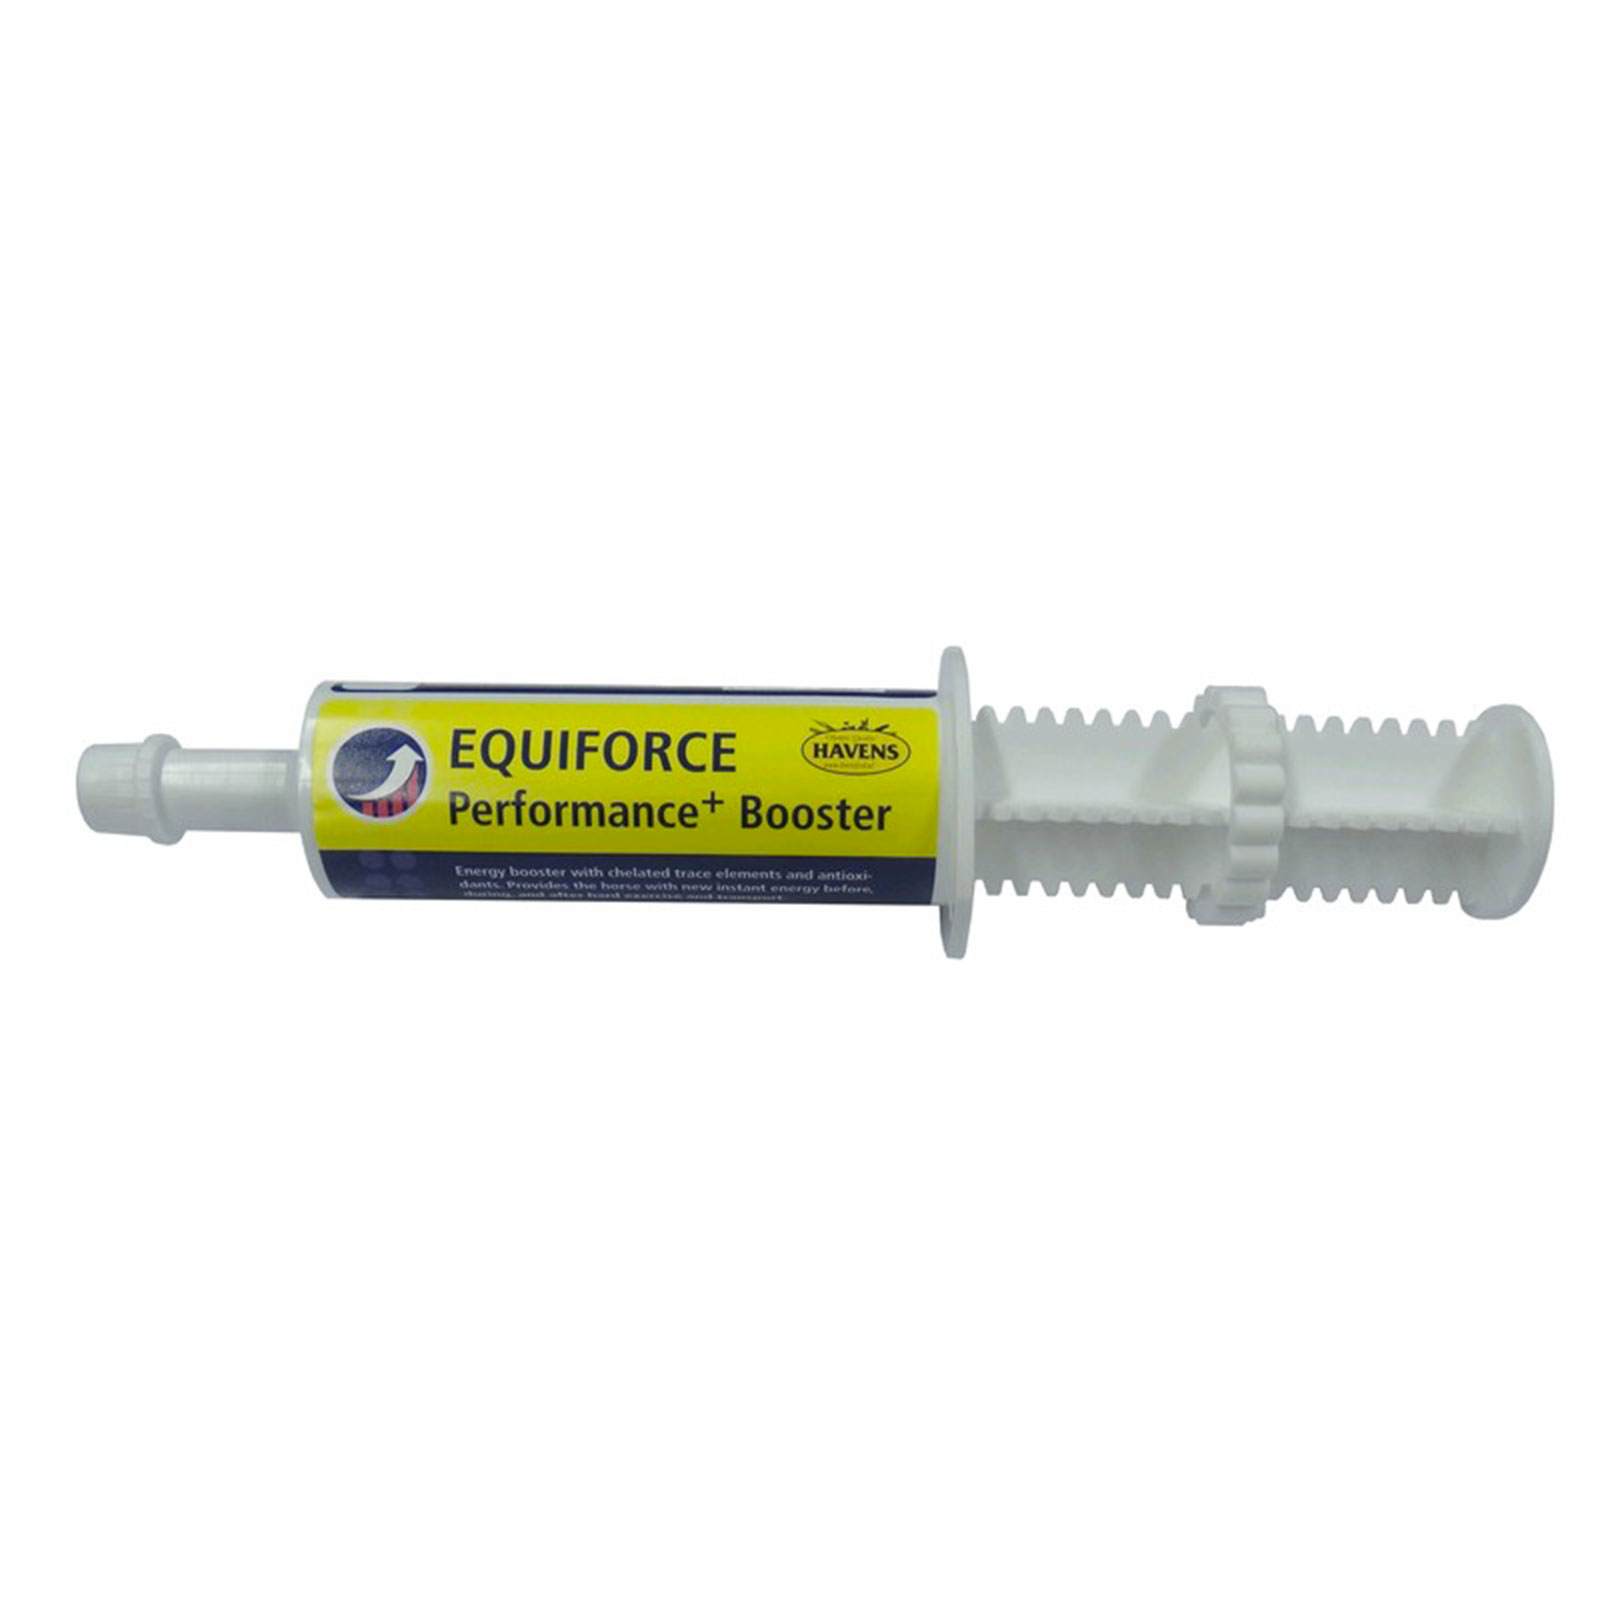 EquiForce Performance +Booster 85g - 